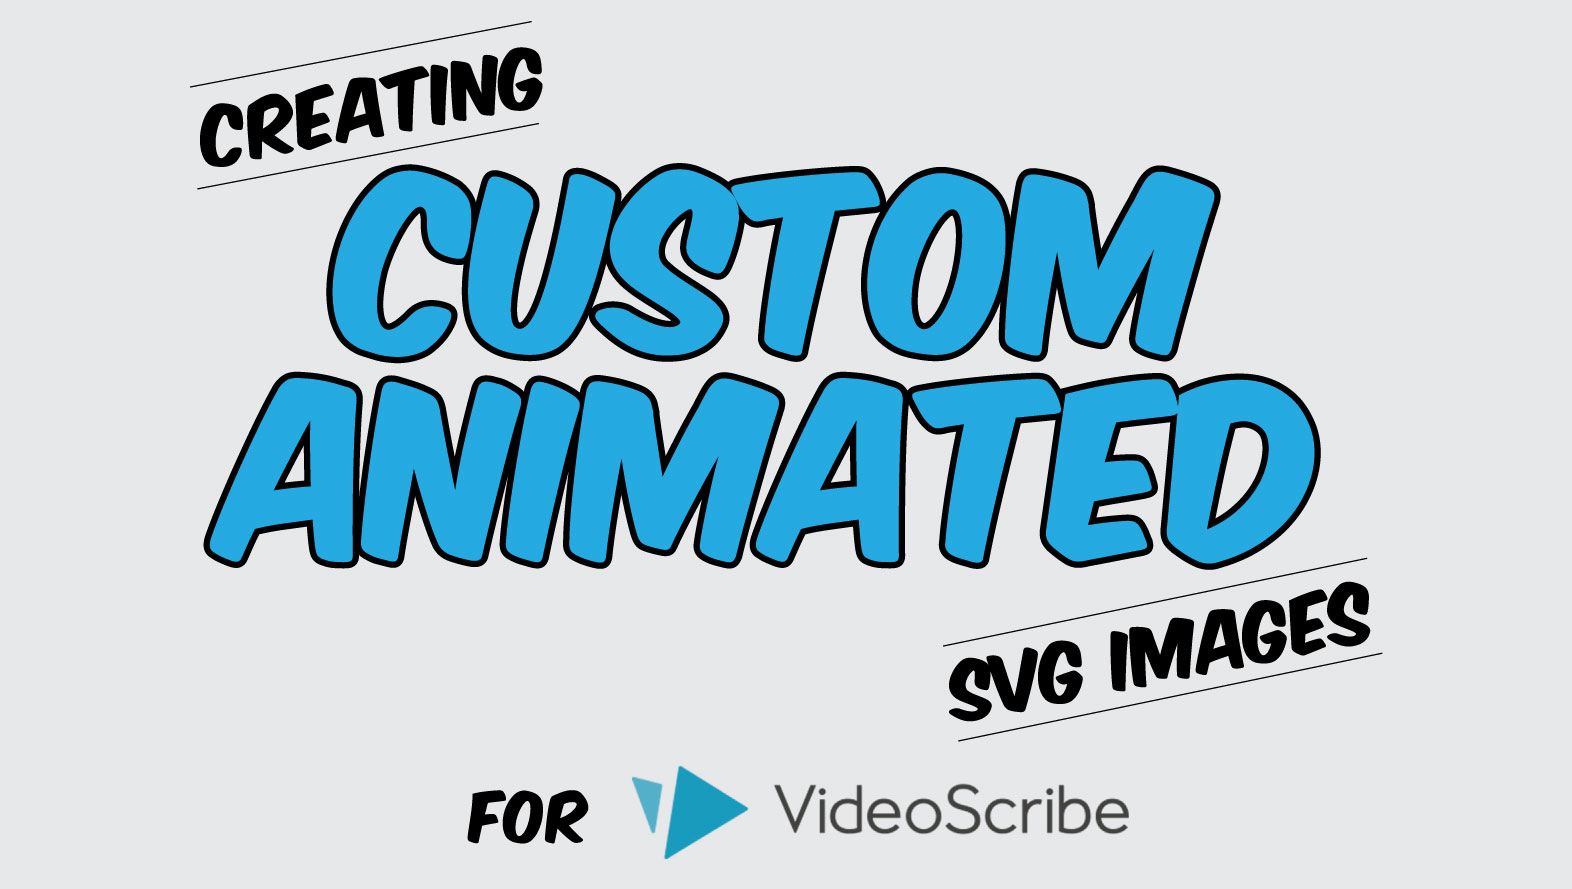 Creating Custom Animations for VideoScribe (an online class)